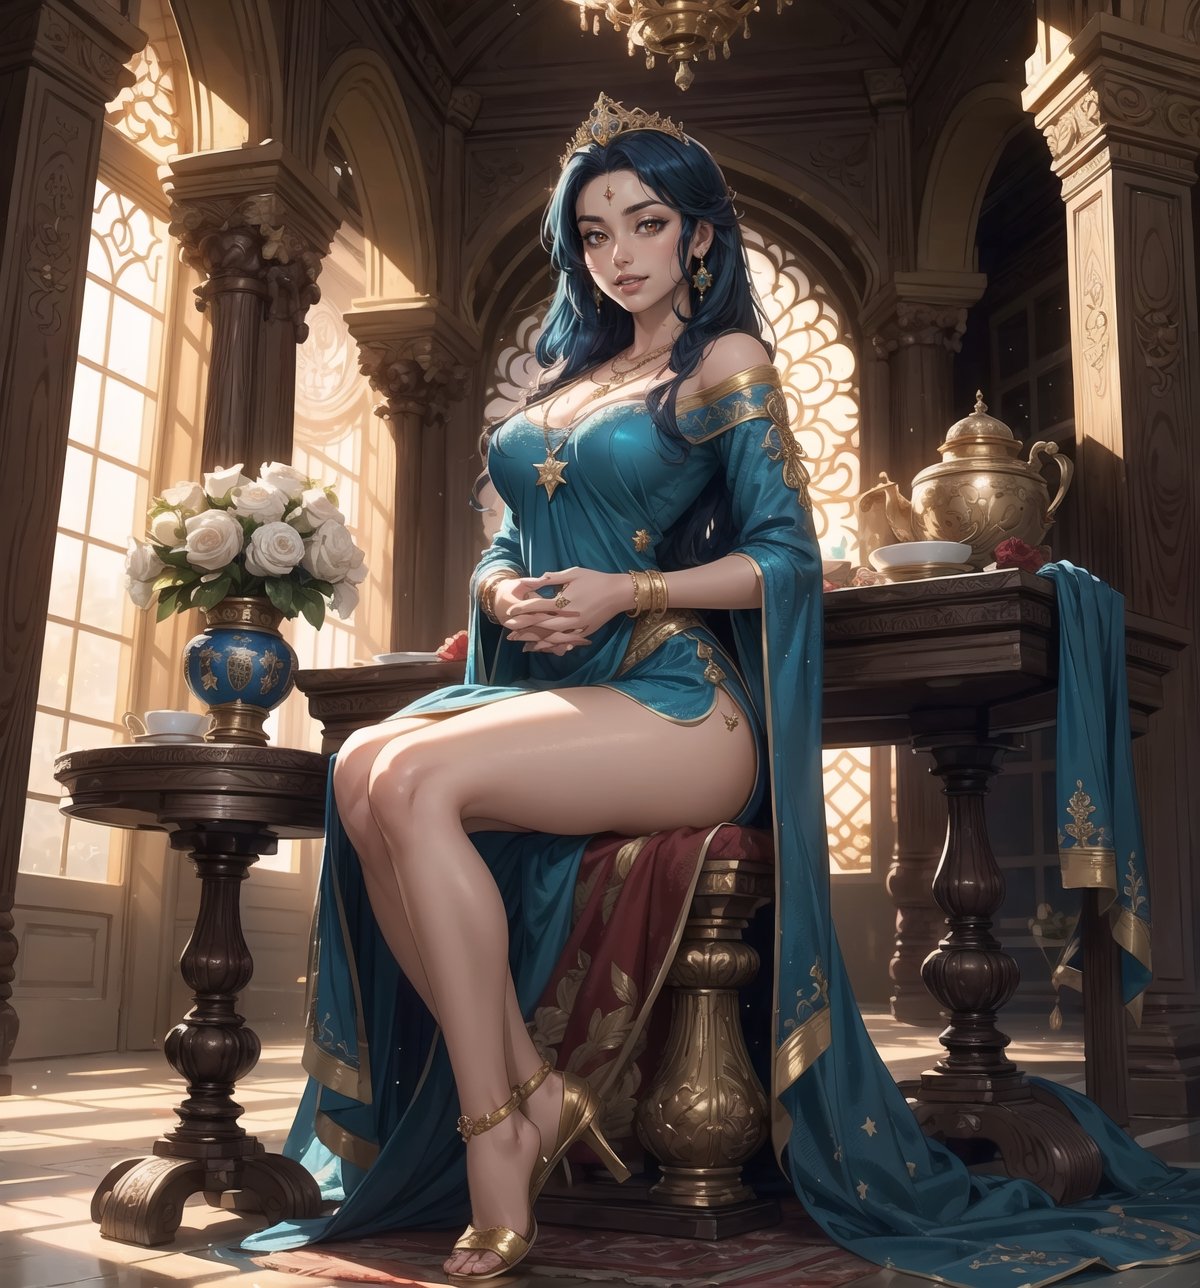 Image in 4K ultra-sharp with a Persian, Arabic, and Oriental style, combining religious elements and opulence. | A 29-year-old woman with long and straight blue hair, dressed in a Persian princess outfit, is standing inside a Persian temple. The outfit consists of a long and flowing dress in shades of blue and gold, with embroidery and precious stone details. She is also wearing a gold tiara with precious stones, a necklace with a star-shaped pendant, and gold bracelets. Her red eyes shine with happiness, and her mouth opens in a radiant smile, showing her white and well-aligned teeth, while her cheeks are flushed. | The composition of the image is in a wide-angle shot, emphasizing the woman's figure and the architectural elements of the temple. The stone walls, columns, statues, wooden gates, tables, metal candelabras, lamps, and stone altar, all over half a meter high, create a majestic and sacred environment. The natural lighting that enters through the high windows highlights the details of the scene. | Soft and warm lighting effects create a welcoming and mystical atmosphere, while detailed textures on the structures and the outfit add realism to the image. The intense shine of the woman's blue hair and the shine of the precious stones on the outfit and the tiara are highlighted by the rays of light that enter the scene. | A happy and enchanting scene of a woman dressed as a Persian princess inside a majestic temple, combining religious elements and opulence. | (((((The image reveals a full-body_shot as she assumes a joyful_pose, engagingly interacting with the structures within the scene in an exciting manner. She takes on a relaxed_pose as she interacts, boldly leaning on a structure, leaning back in an exciting way))))) | ((perfect_anatomy, perfect_body, perfect_pose)), ((full-body_shot)), ((perfect fingers, better hands, perfect hands):1.5), ((perfect legs, perfect feet):1.5), ((perfect design)), ((correct errors)), ((perfect composition)), ((very detailed scene, very detailed background, correct imperfections, perfect layout):1.2), ((More Detail, Enhance))